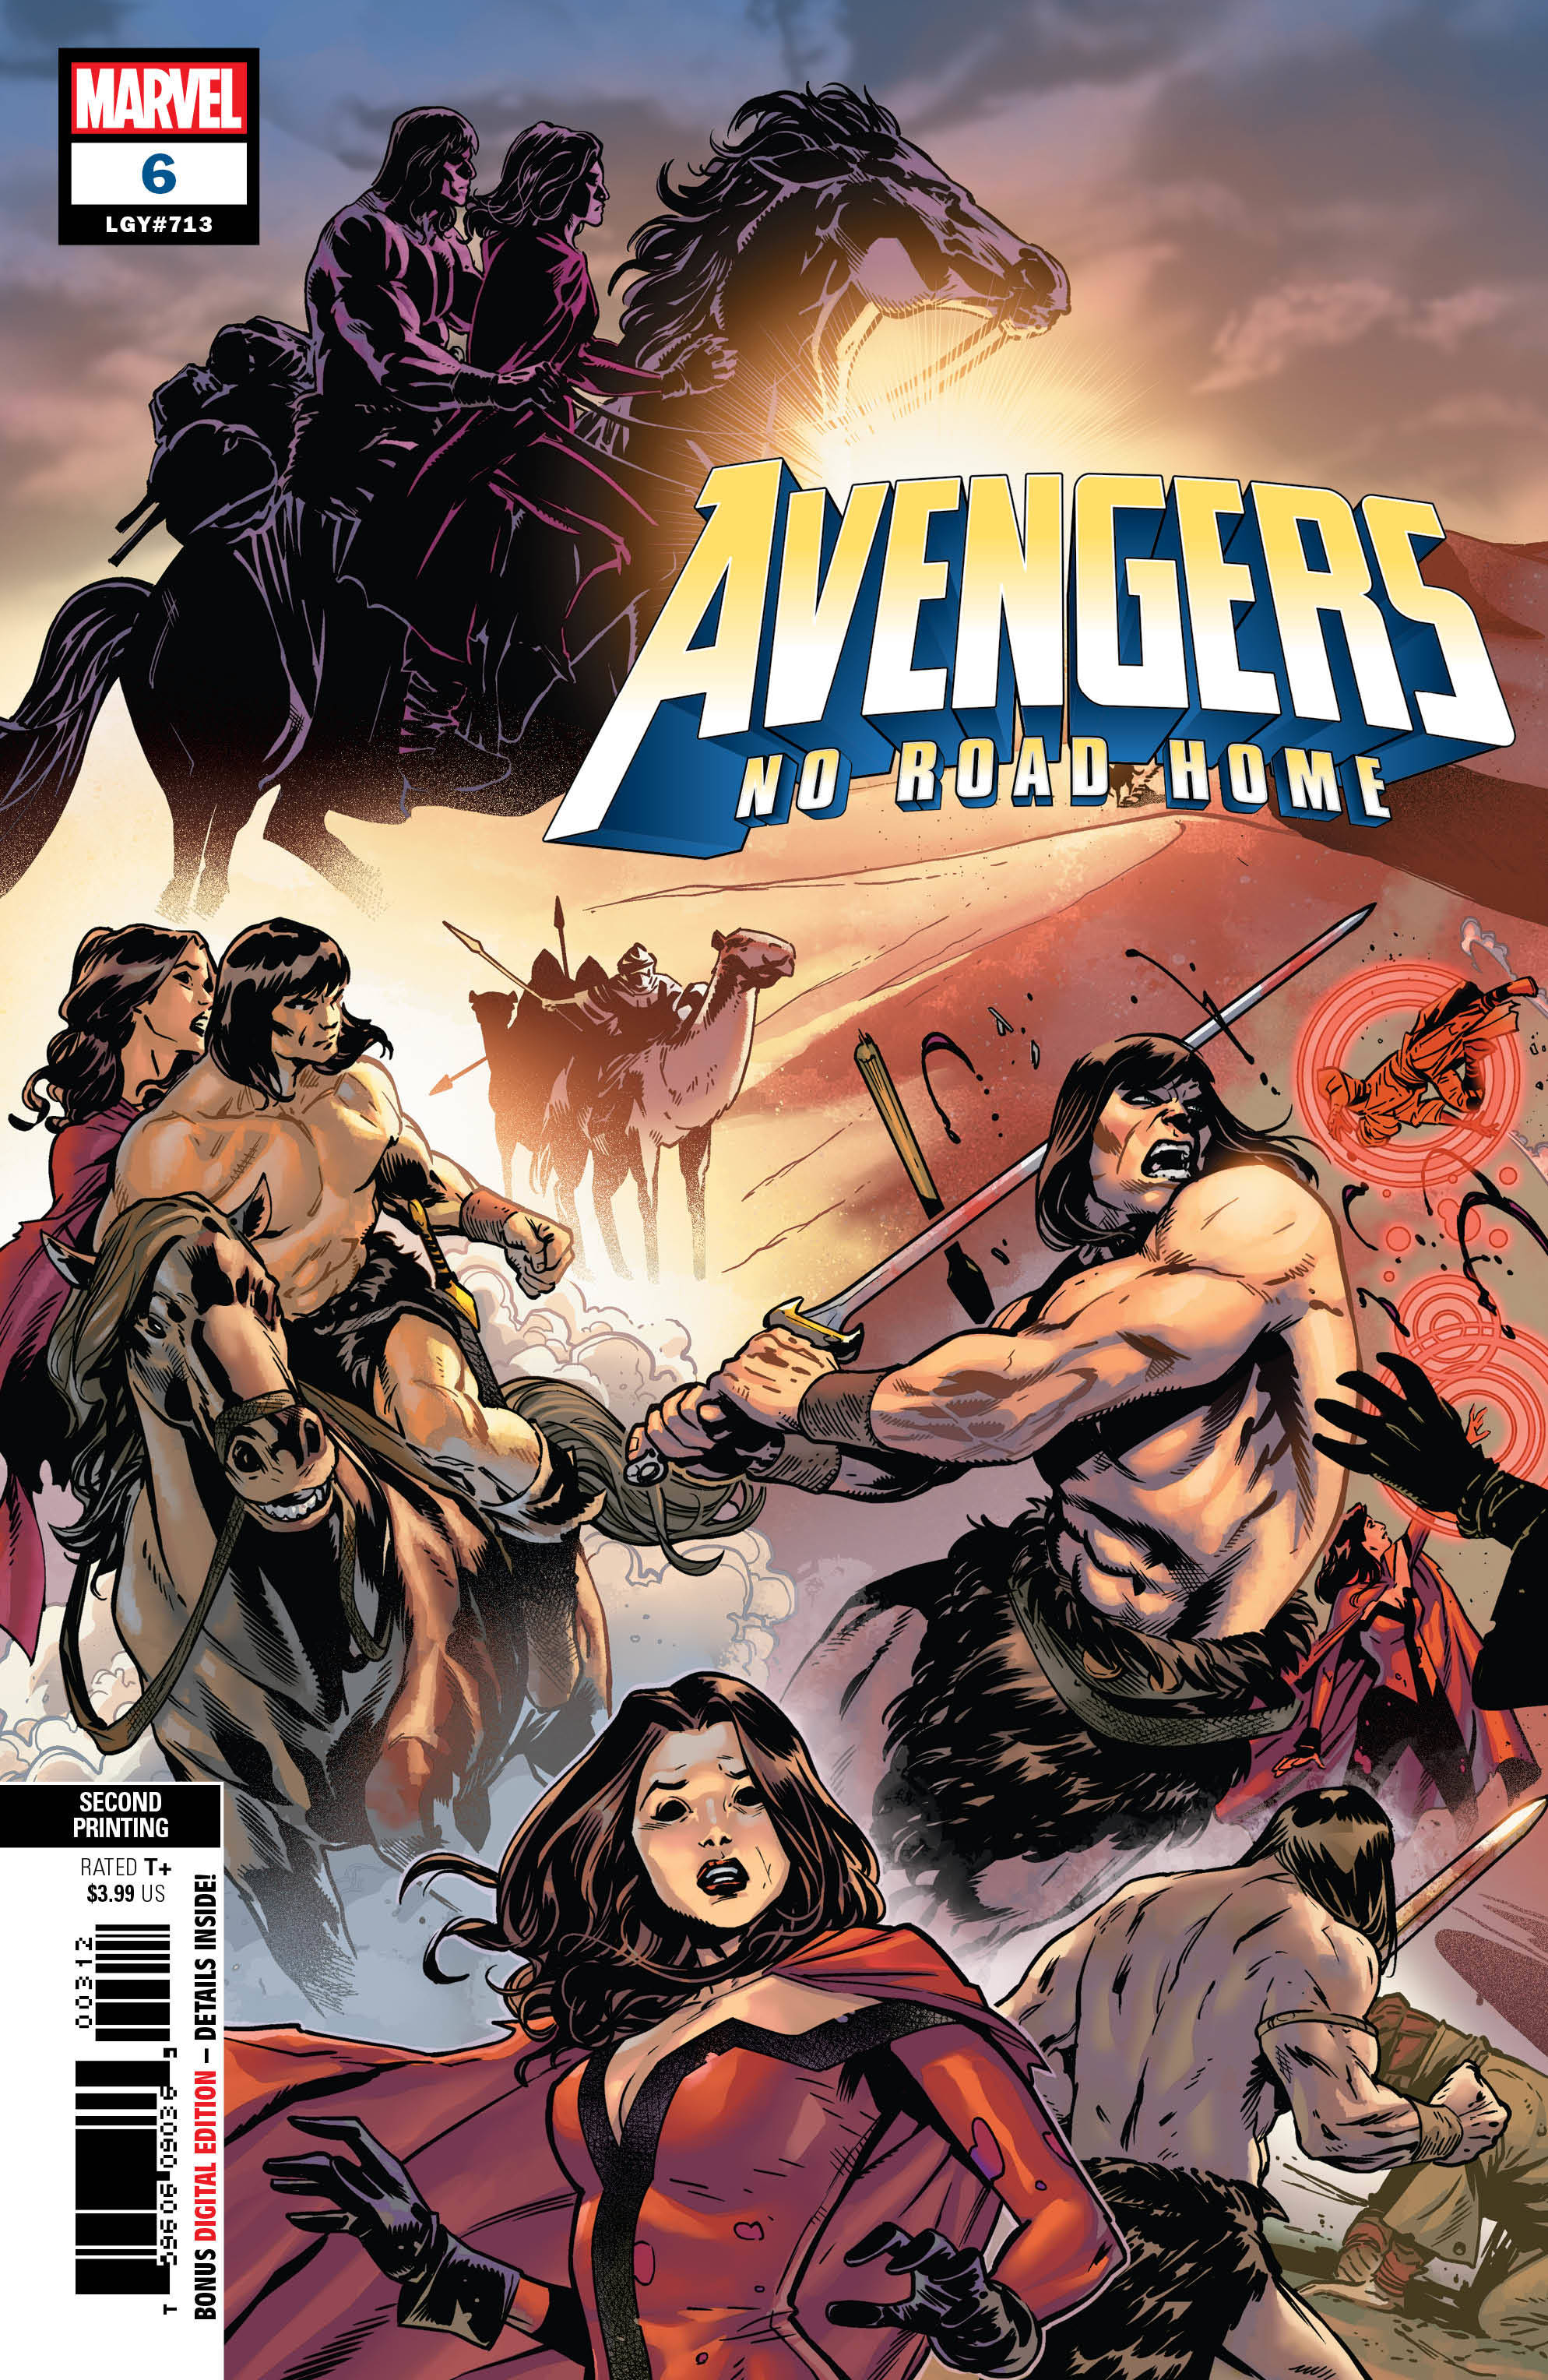 Avengers No Road Home #6 (Of 10) 2nd Printing Izaakse Variant